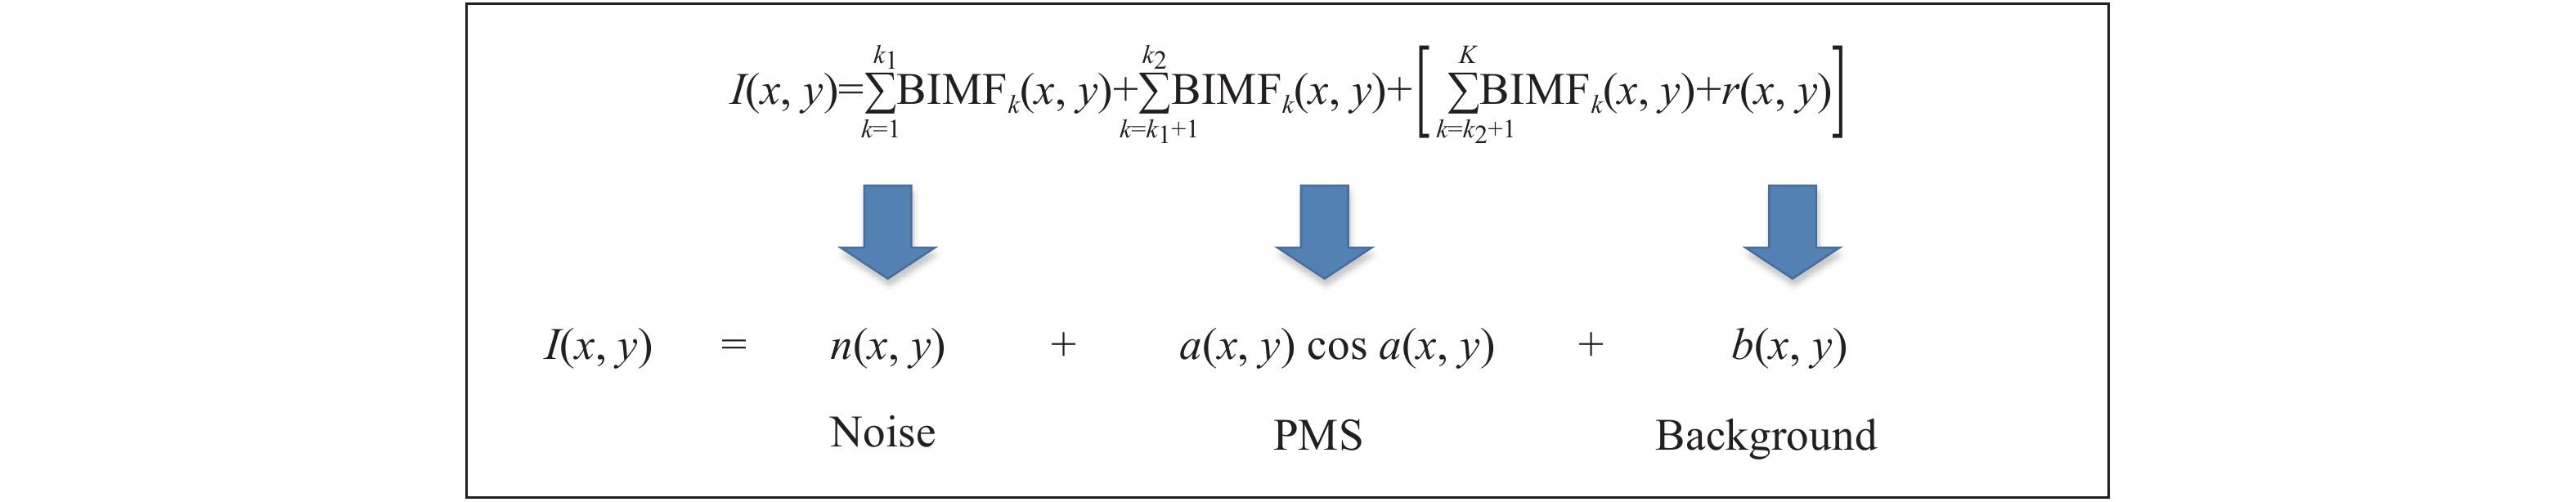 Relationship between the deccomposition results of BEMD and the components of a fringe pattern